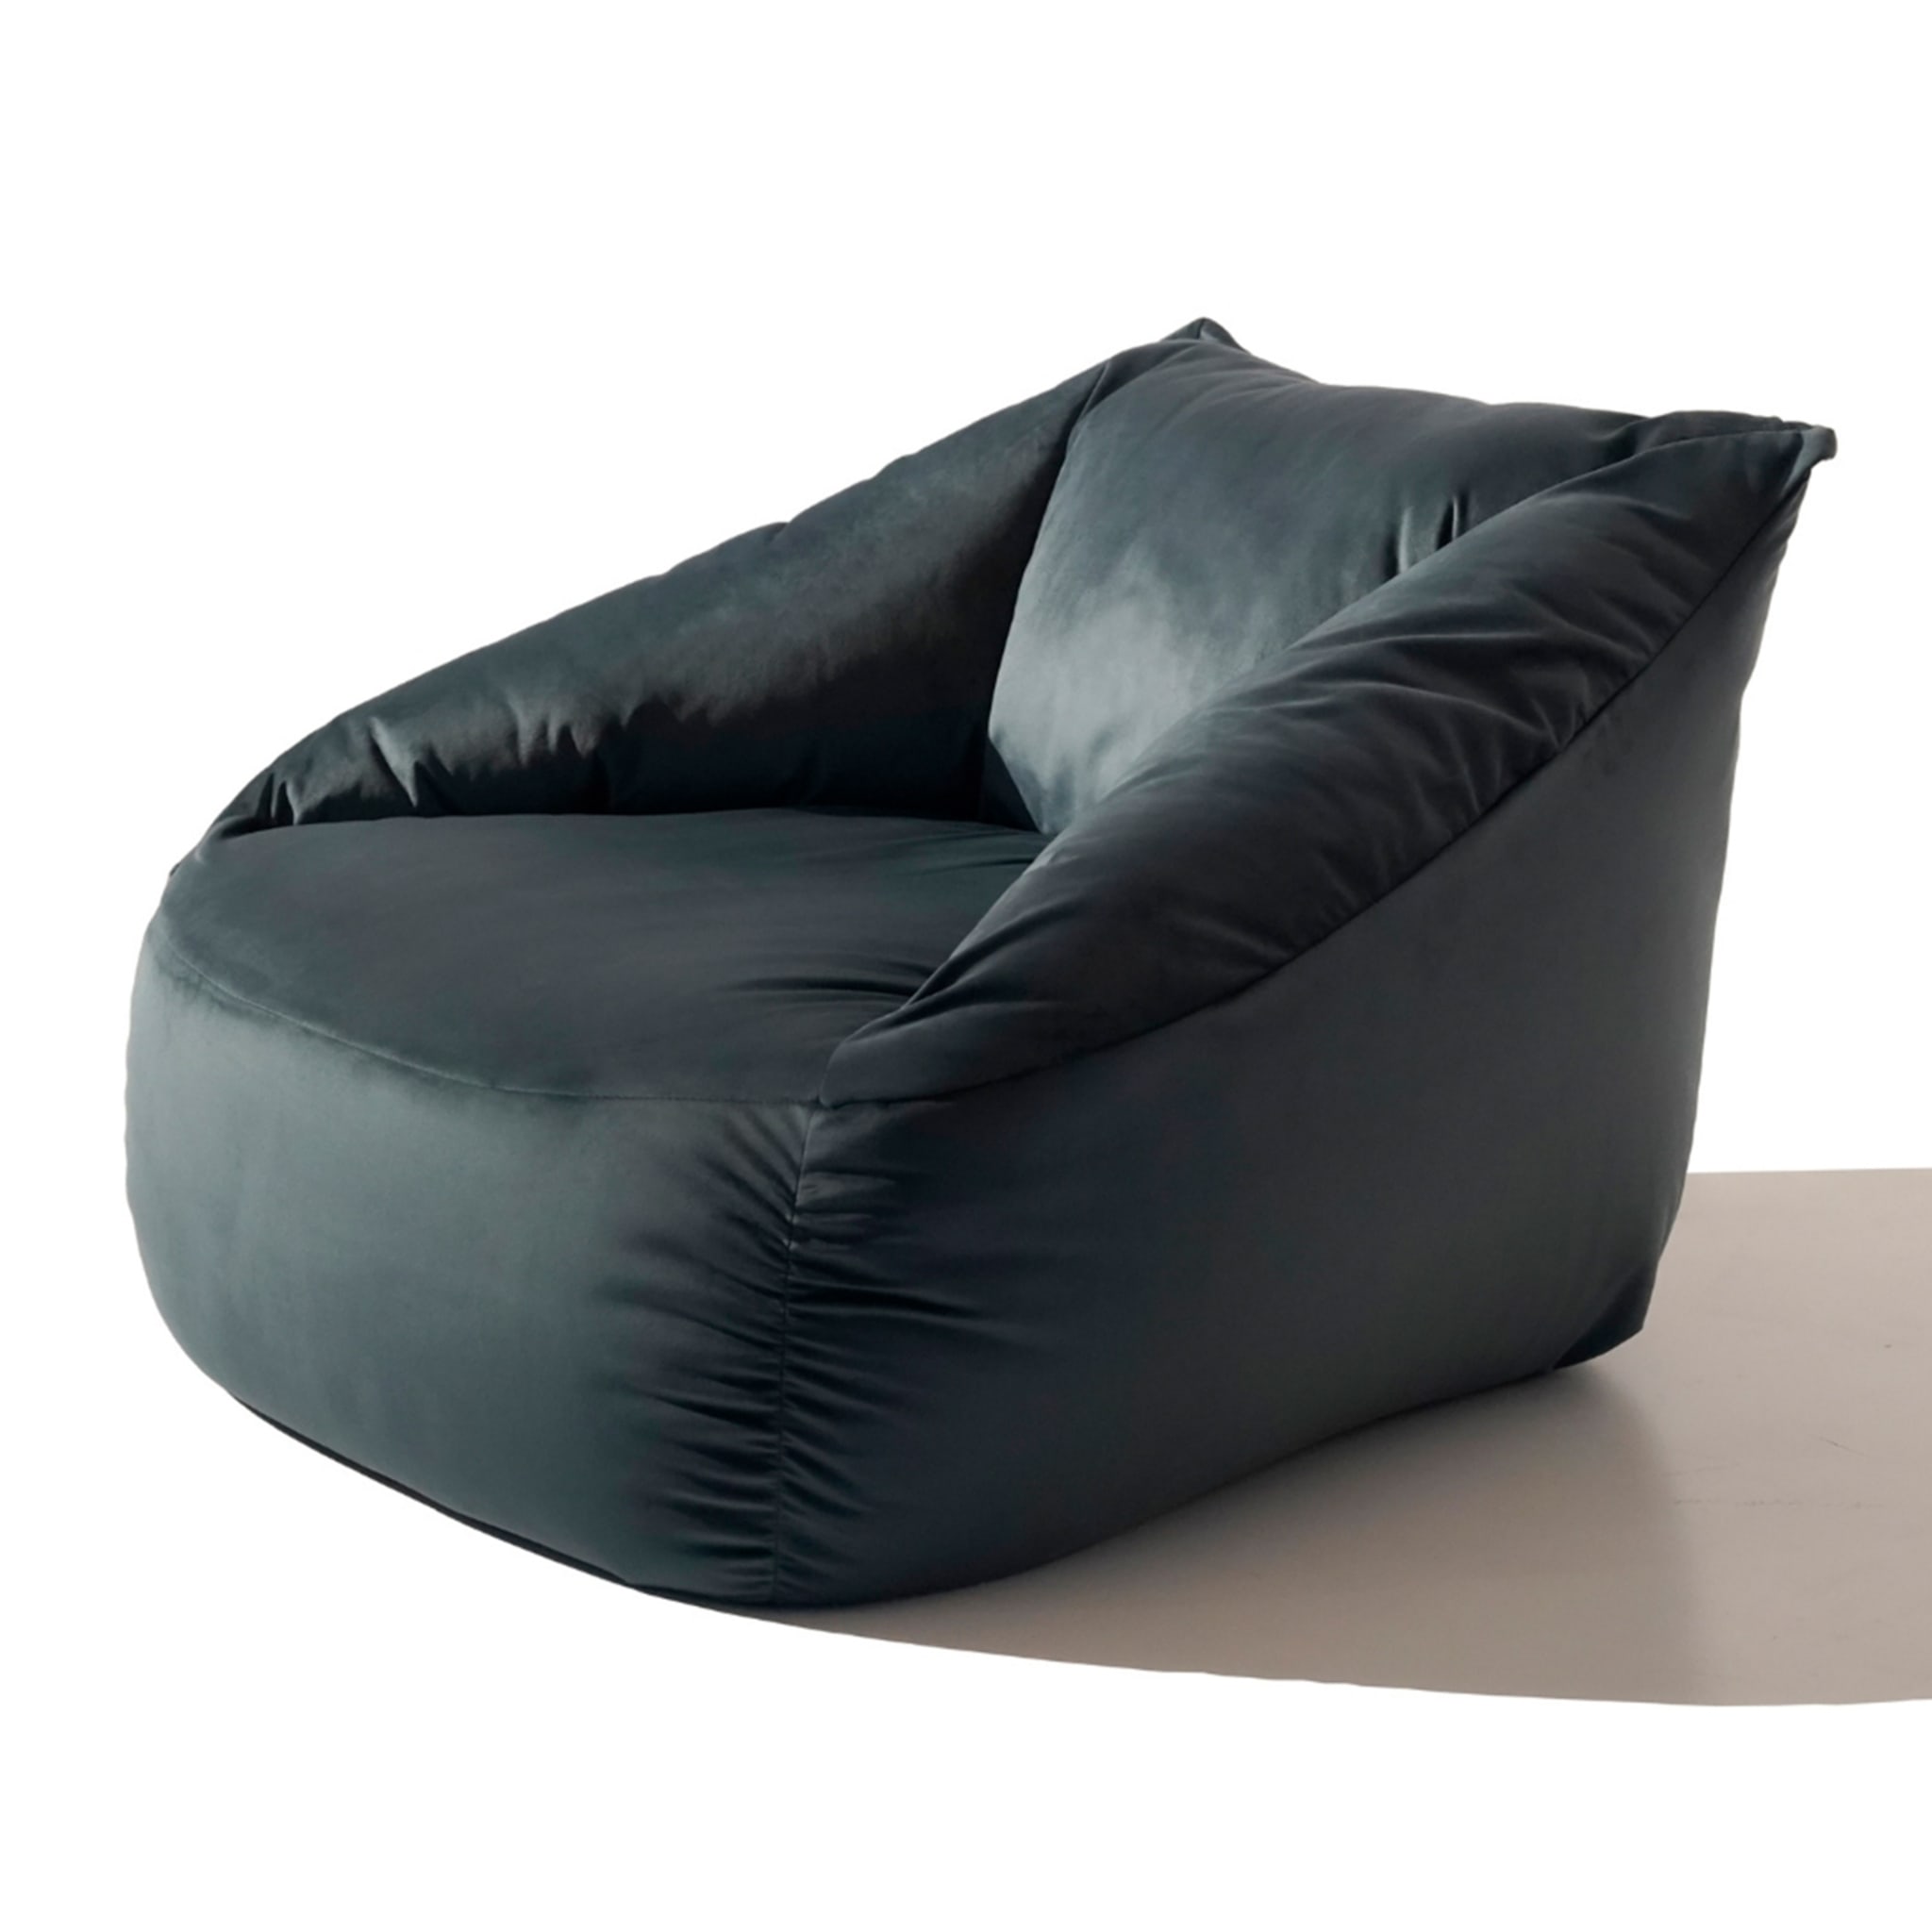 Botero Armchair by Marco and Giulio Mantellassi  - Alternative view 1